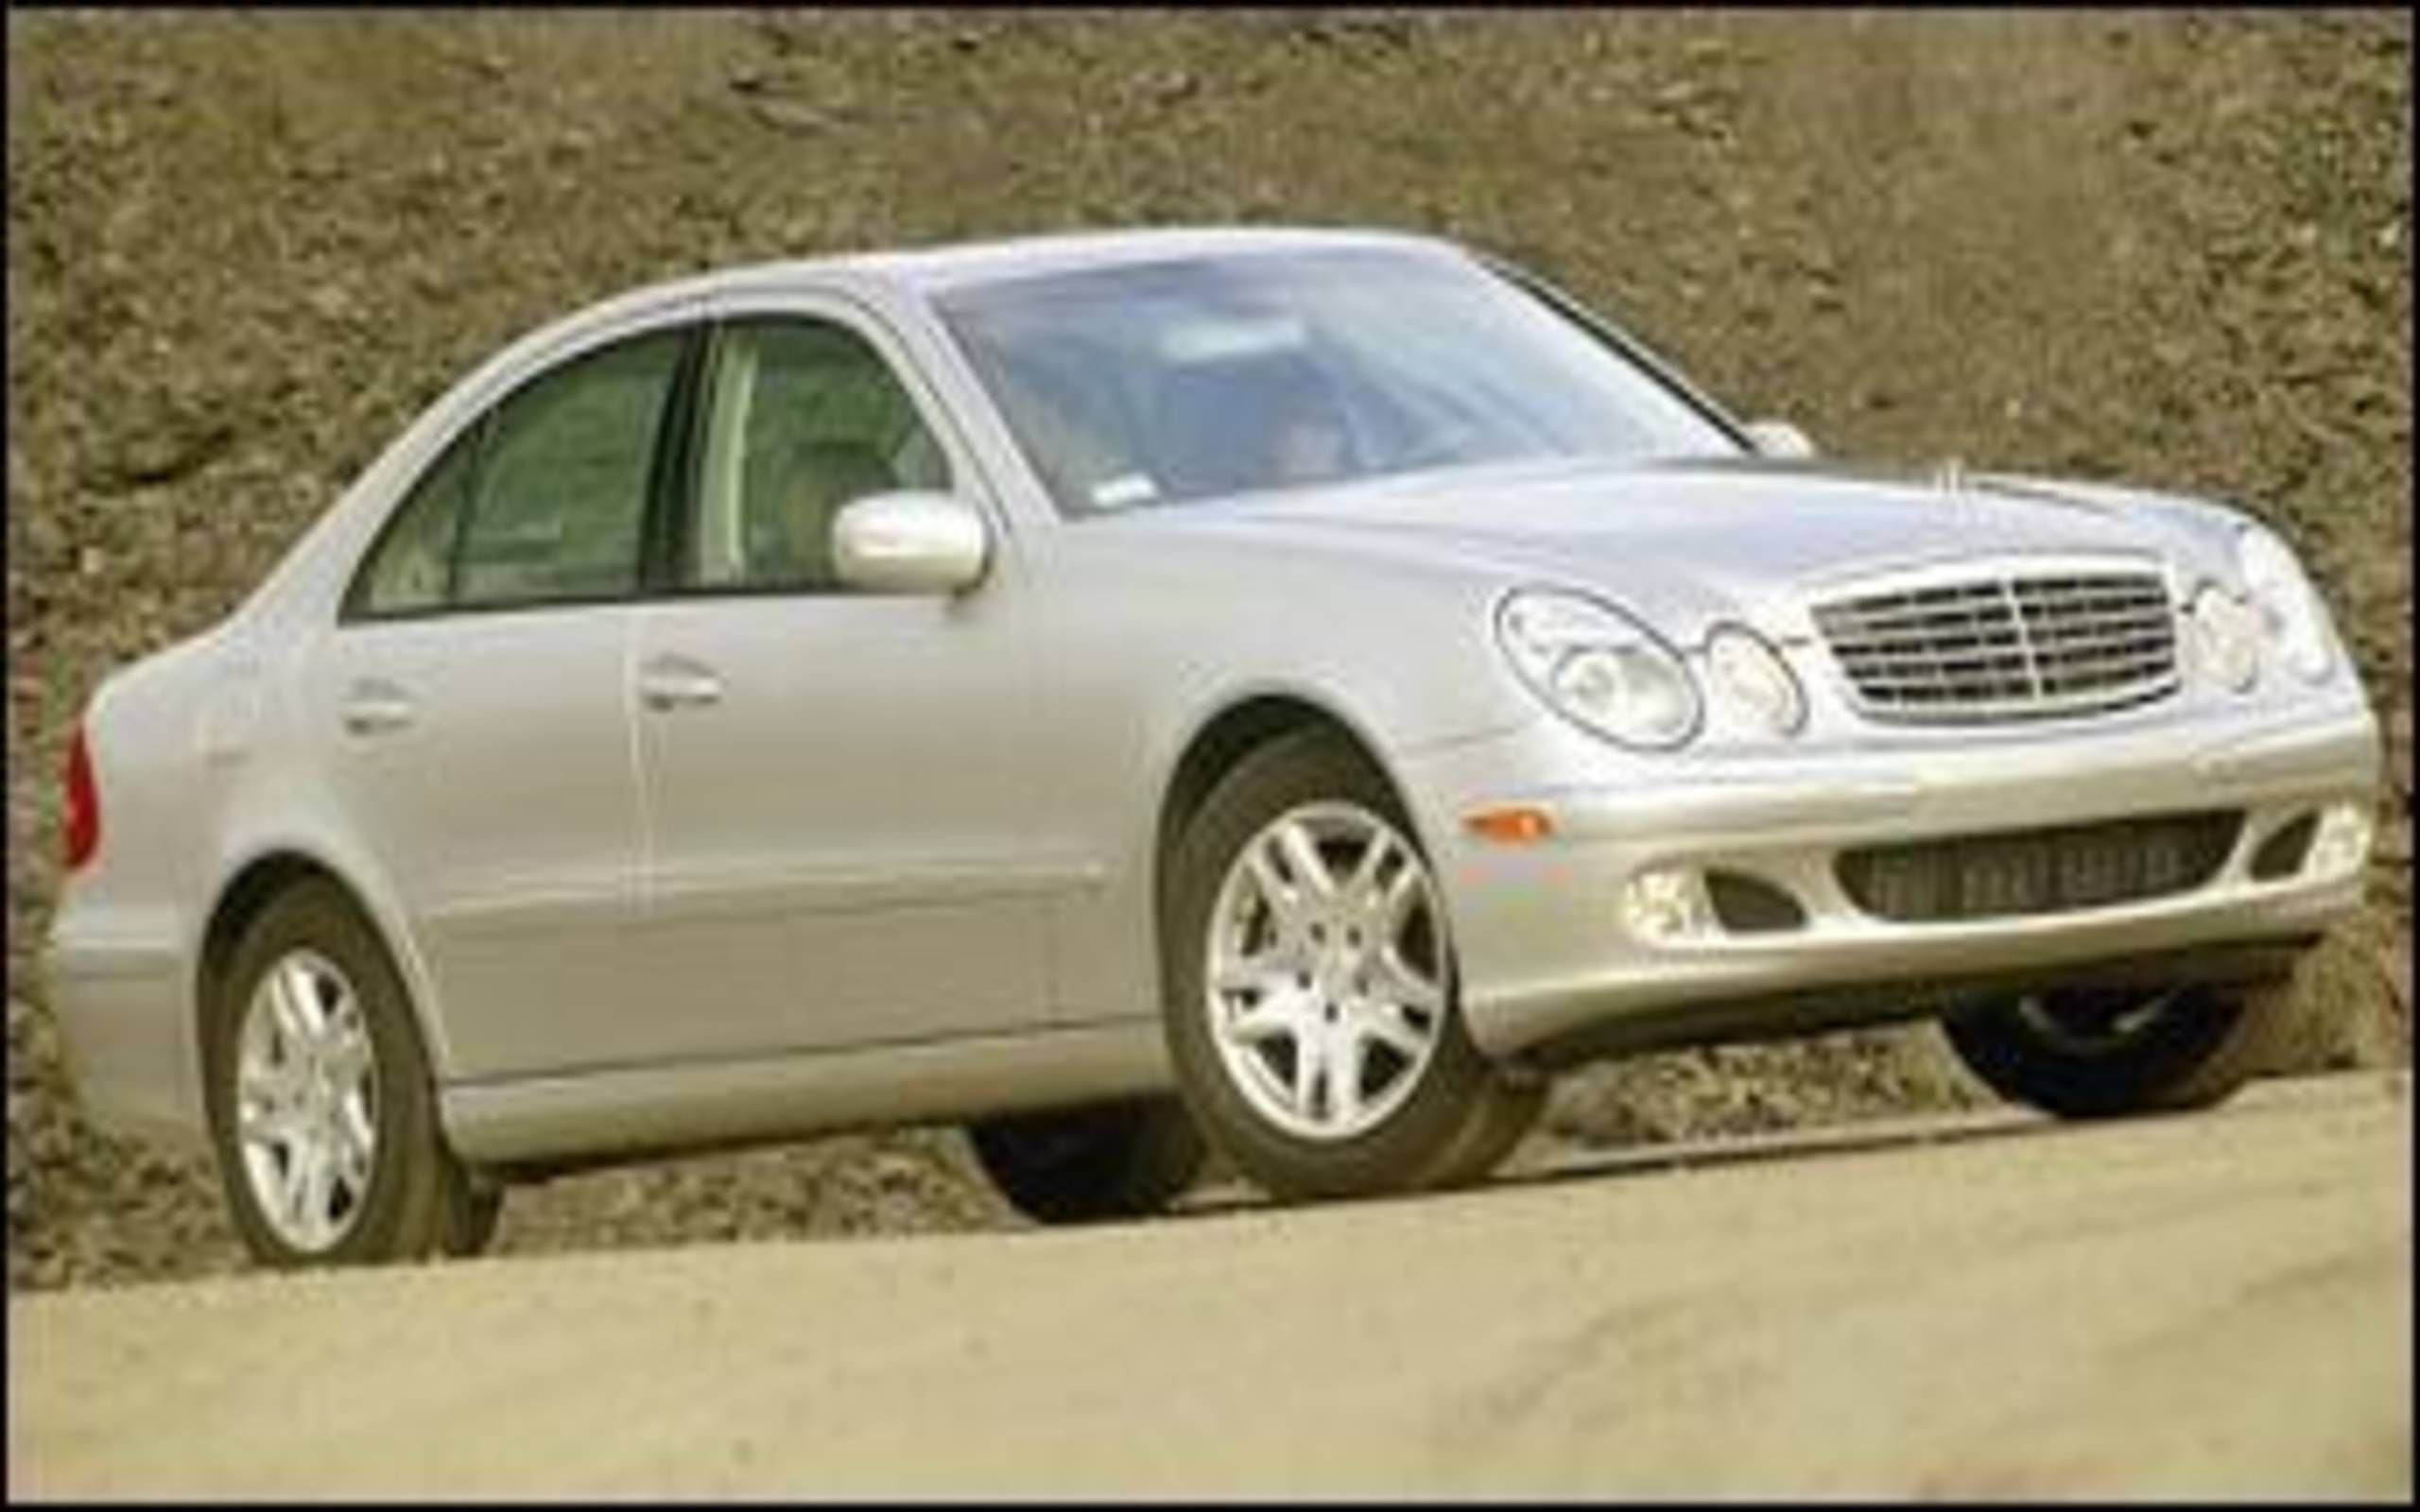 2005 Mercedes Benz E320 Cdi M B Delivers A Diesel The First Of What Promises To Be Many More